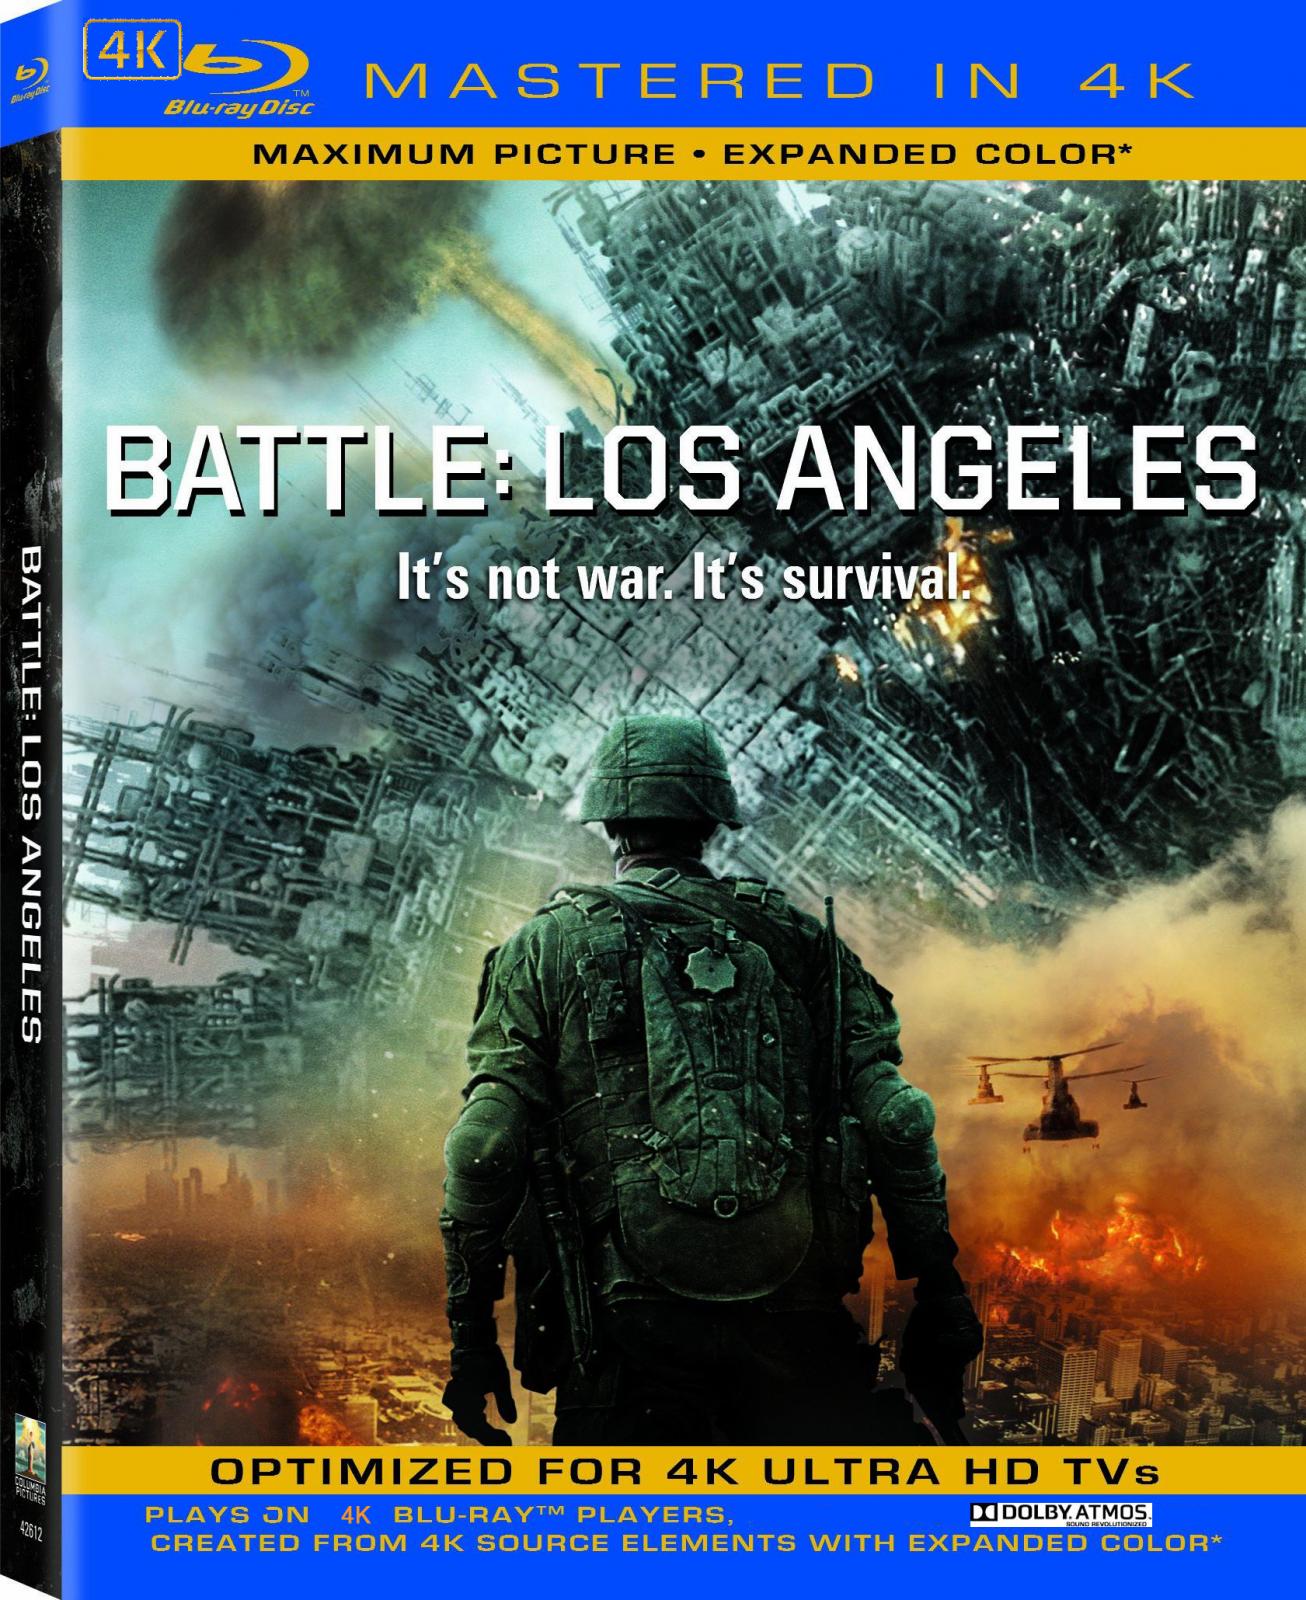 battle-los-angeles-4Kblu-ray-cover-22.jpg